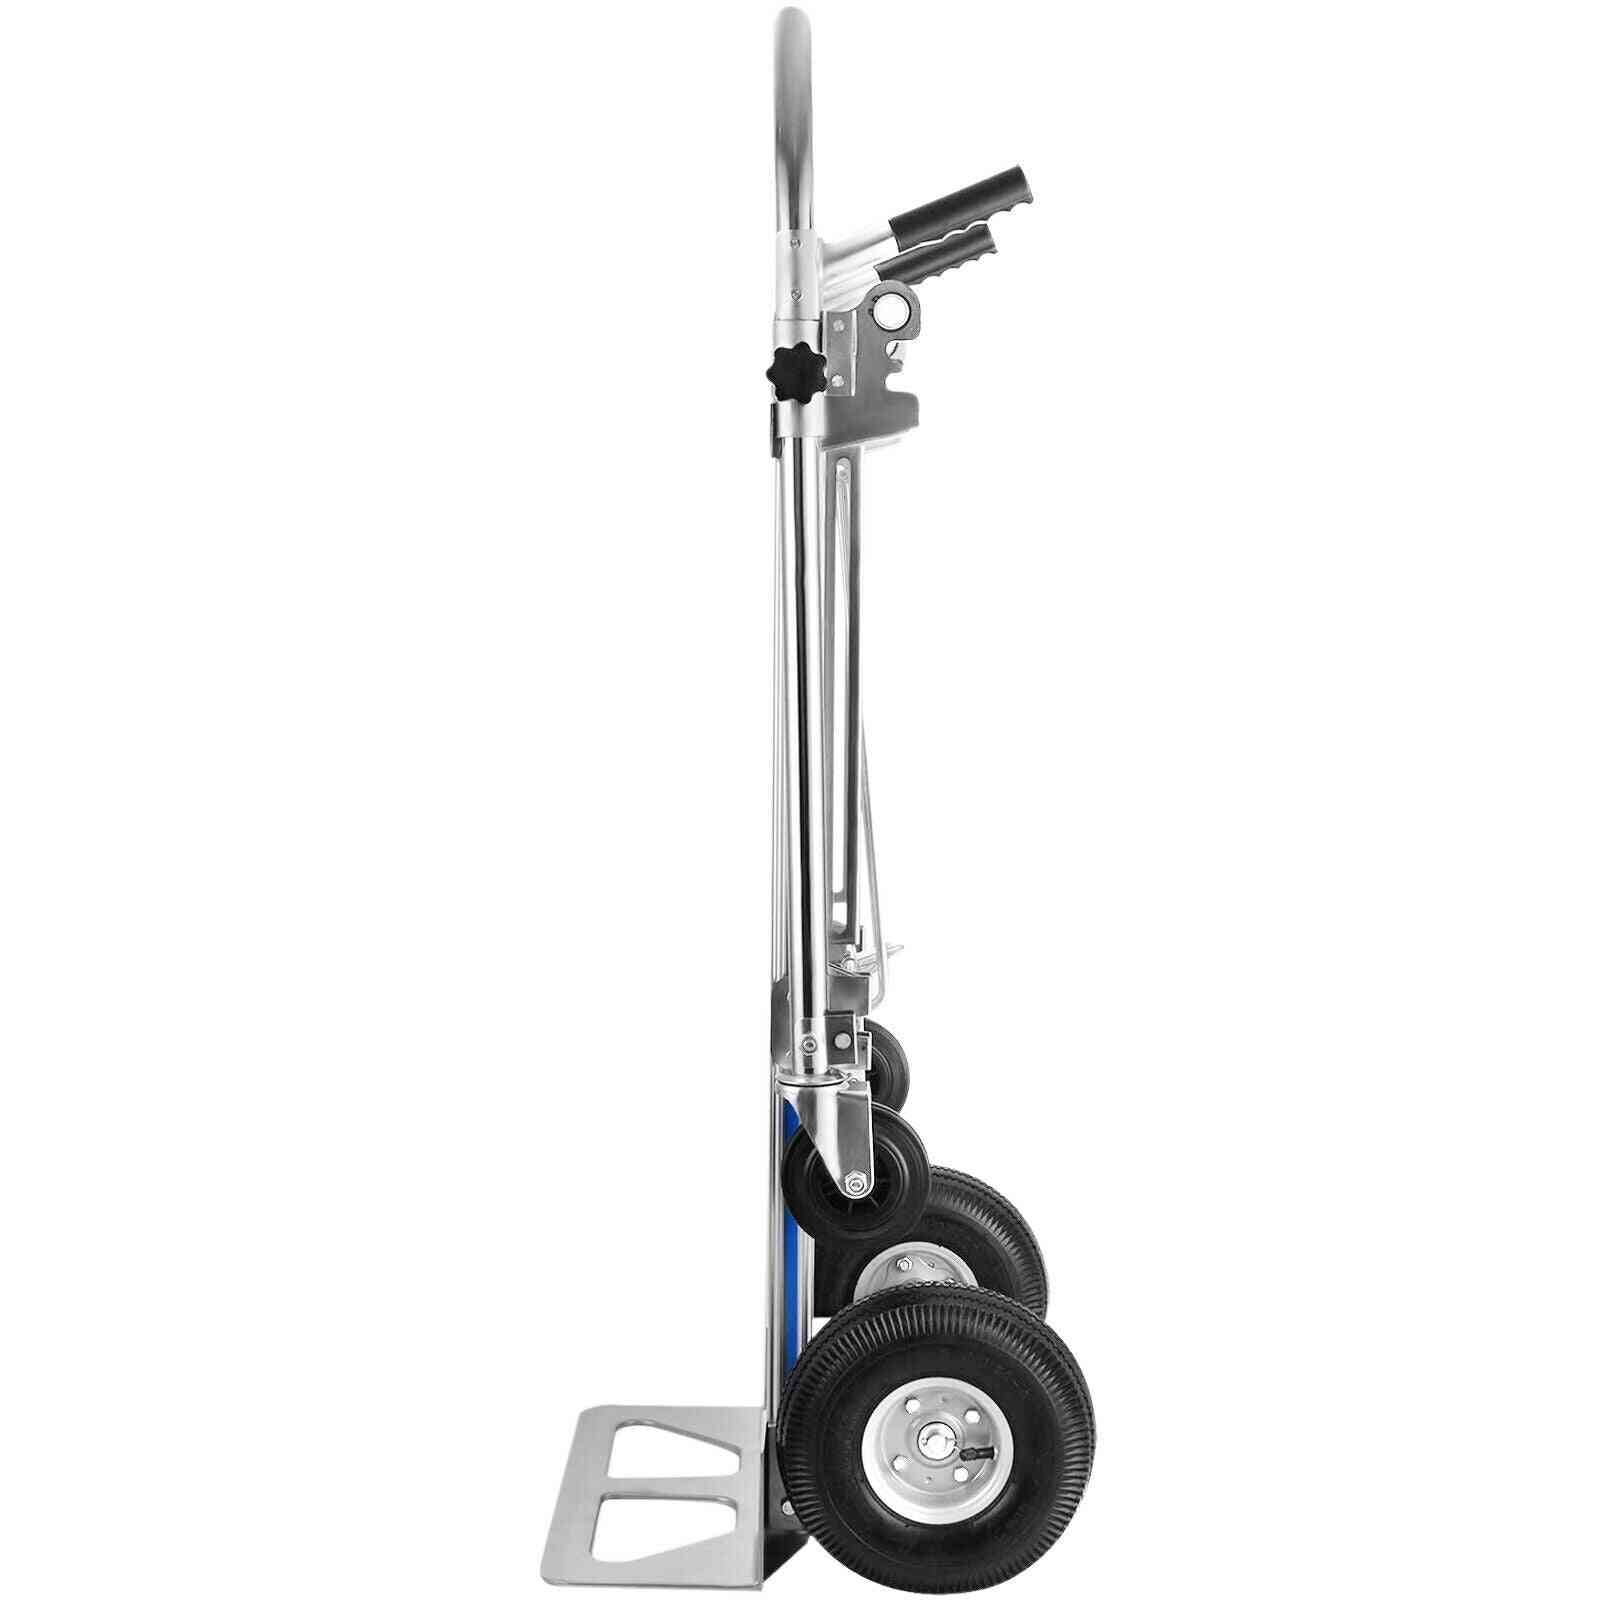 3-in-1 Aluminum Hand Truck, Foldable Dolly Cart, Converts Stair Climber